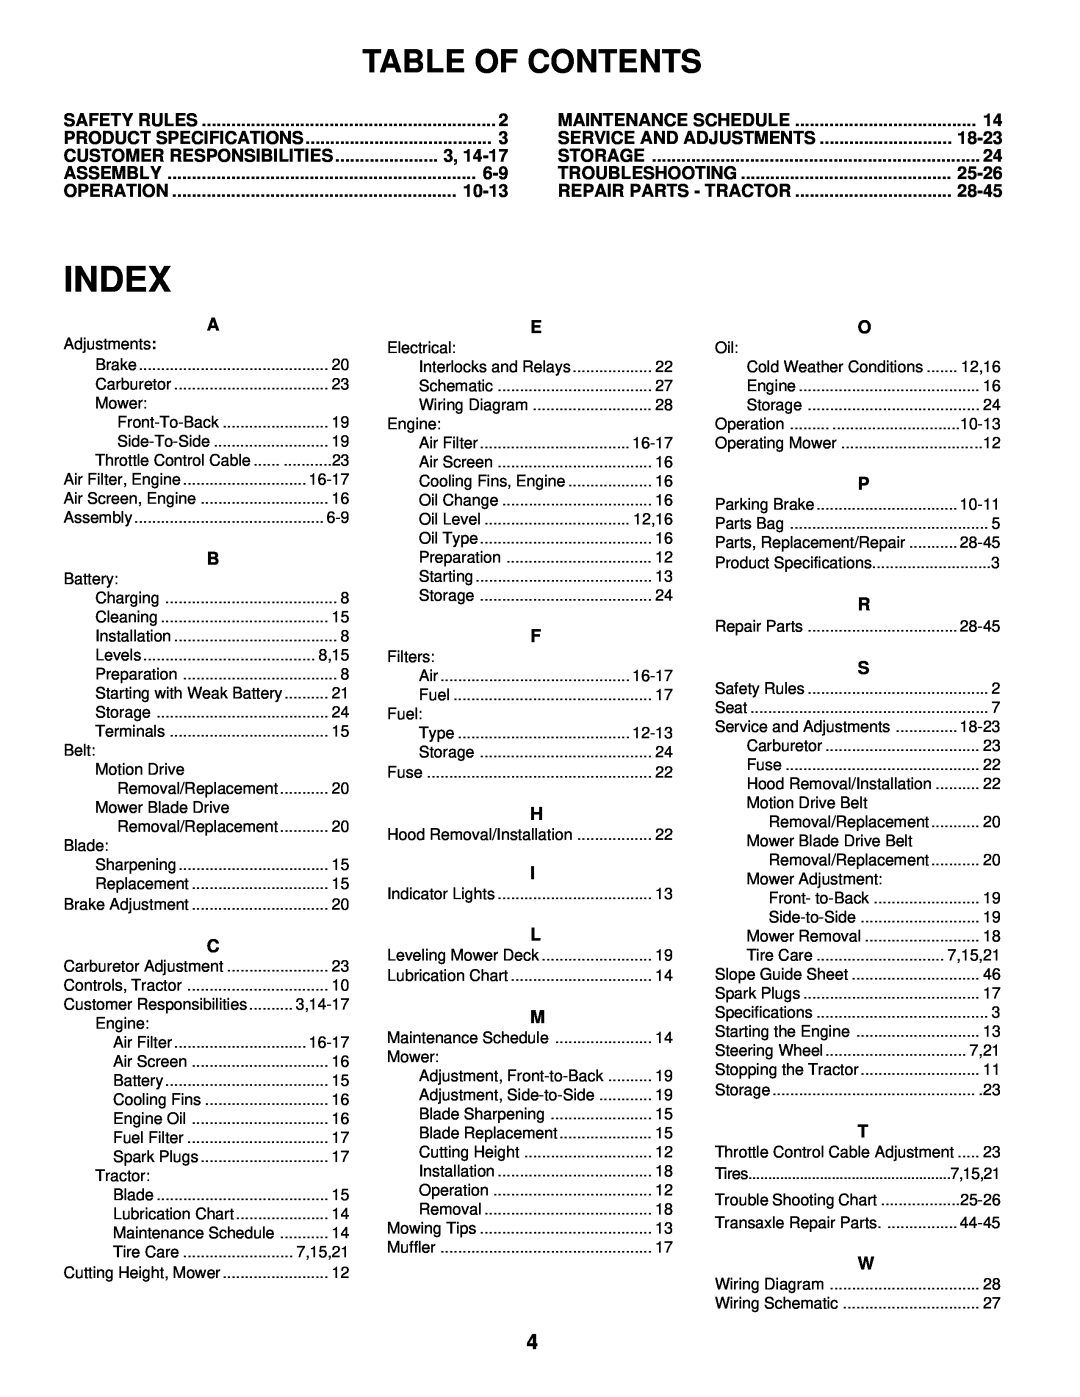 Husqvarna YT180 Table Of Contents, Customer Responsibilities, 10-13, Service And Adjustments, 18-23, 25-26, 28-45, Index 